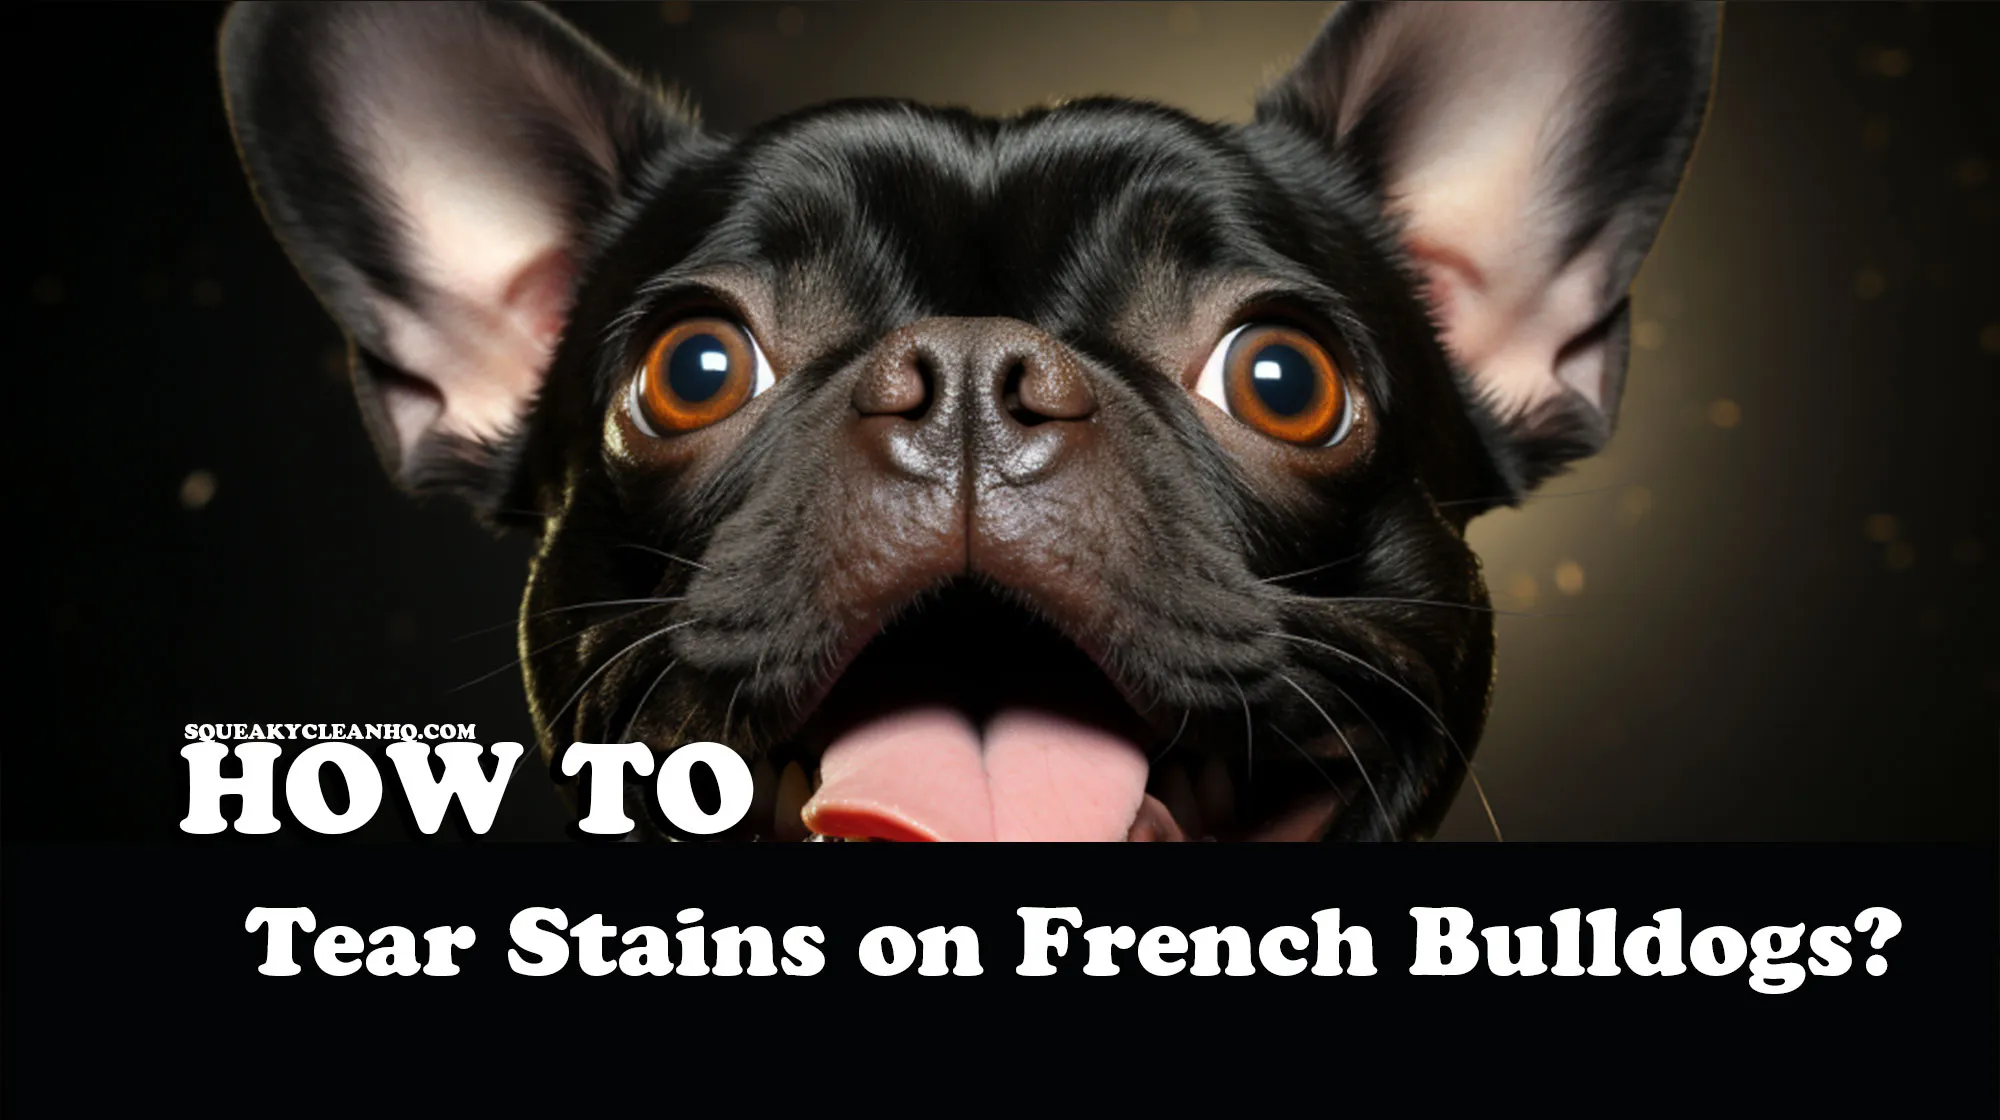 How to Clean Tear Stains on French Bulldogs? - Squeaky Clean HQ